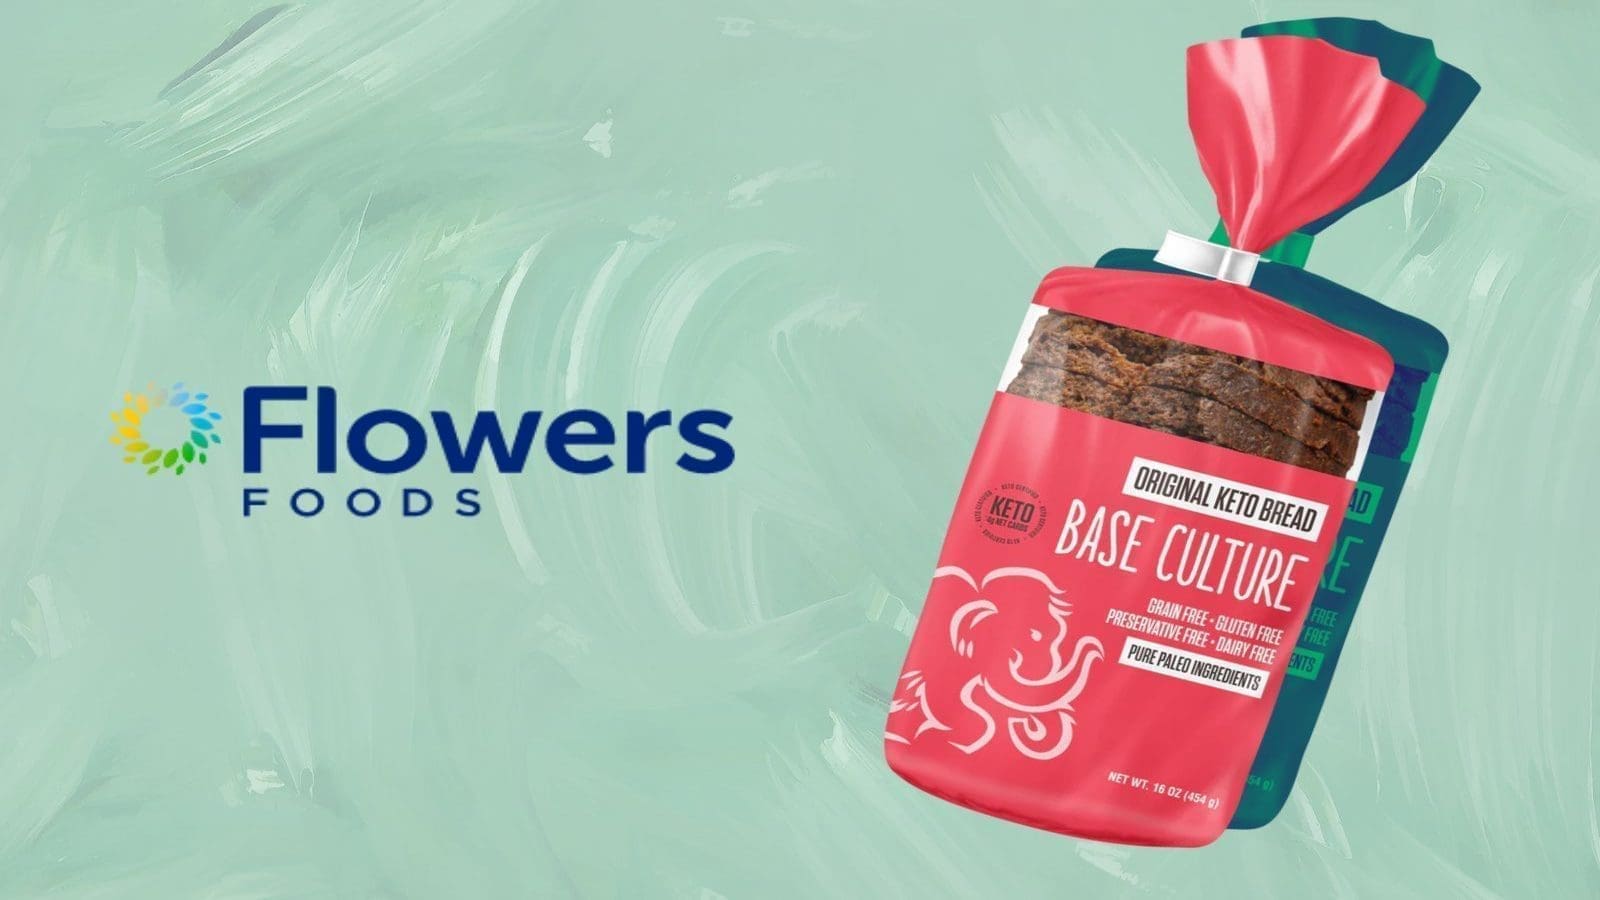 Flowers Foods invests in better-for-you baker Base Culture